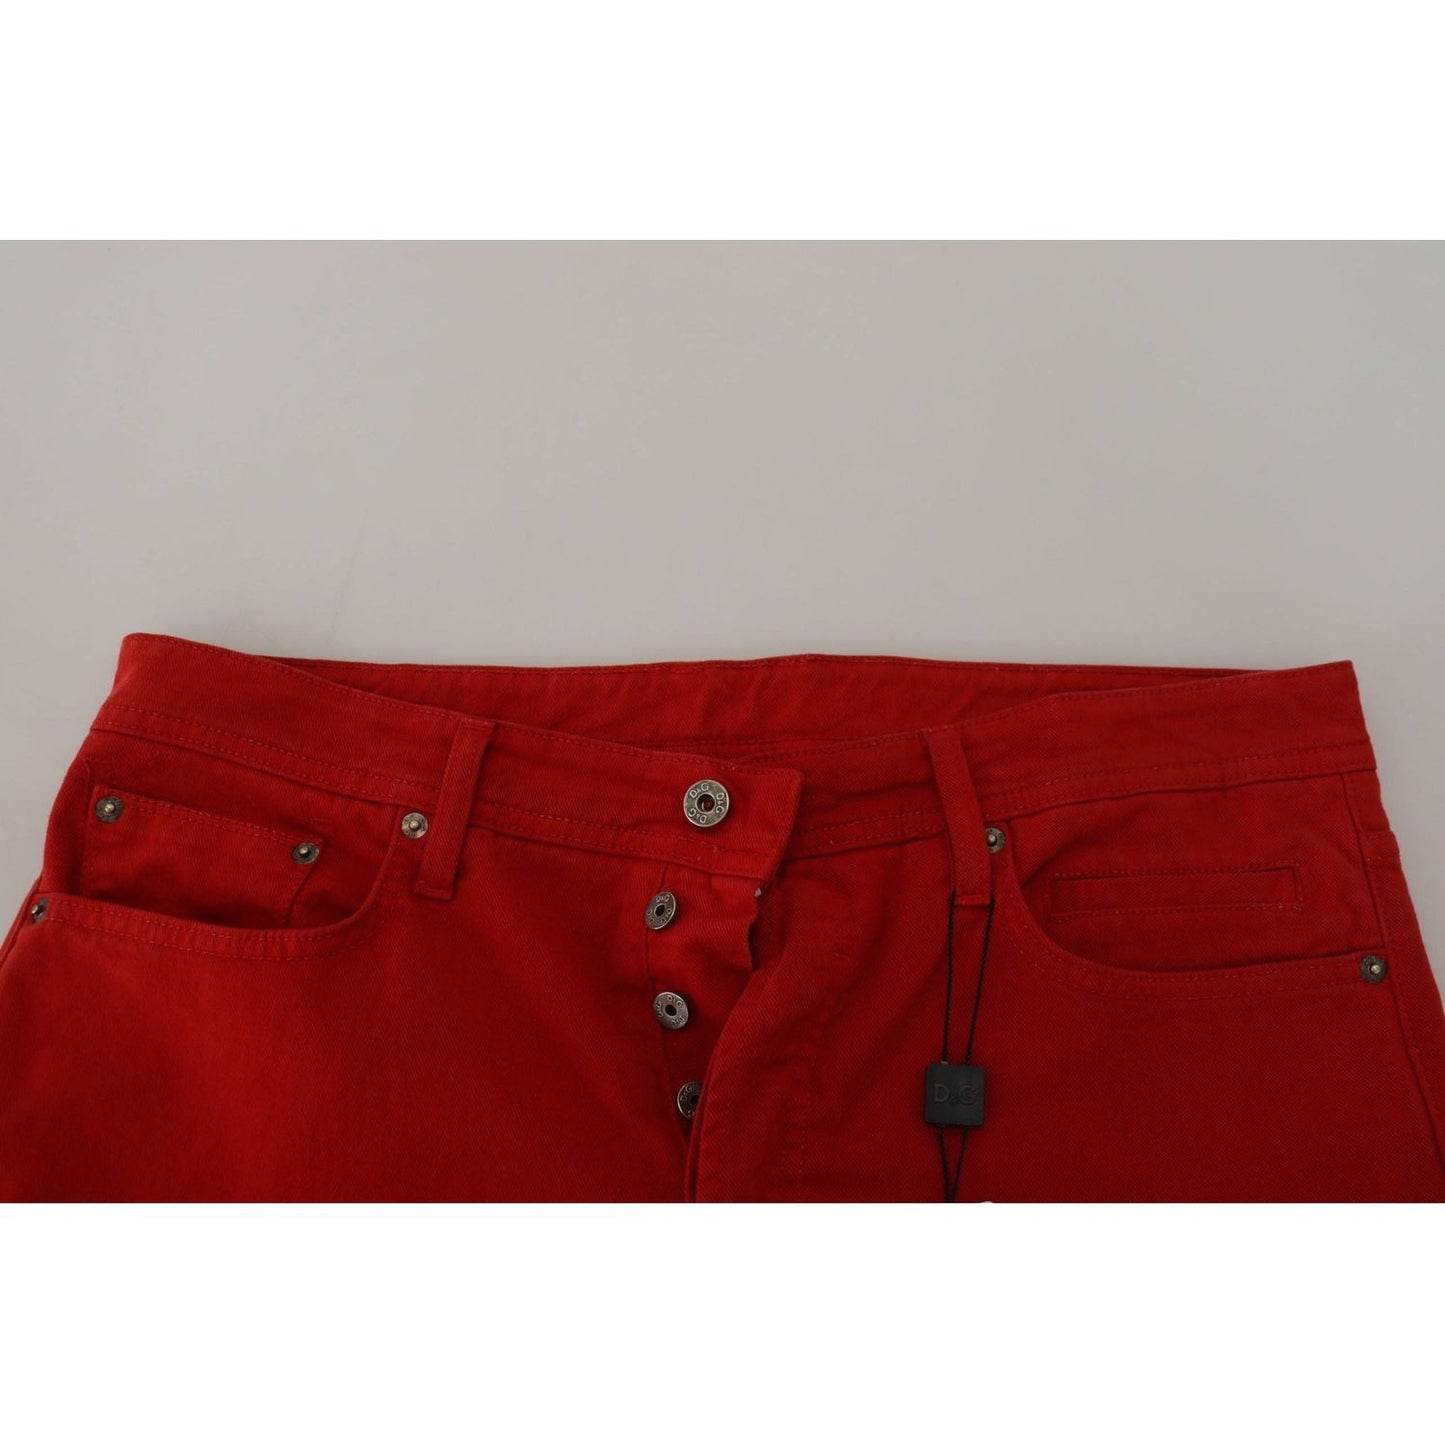 Dolce & Gabbana Chic Red Cotton Denim Pants red-cotton-straight-fit-men-denim-jeans IMG_7856-scaled-852954aa-7dc.jpg